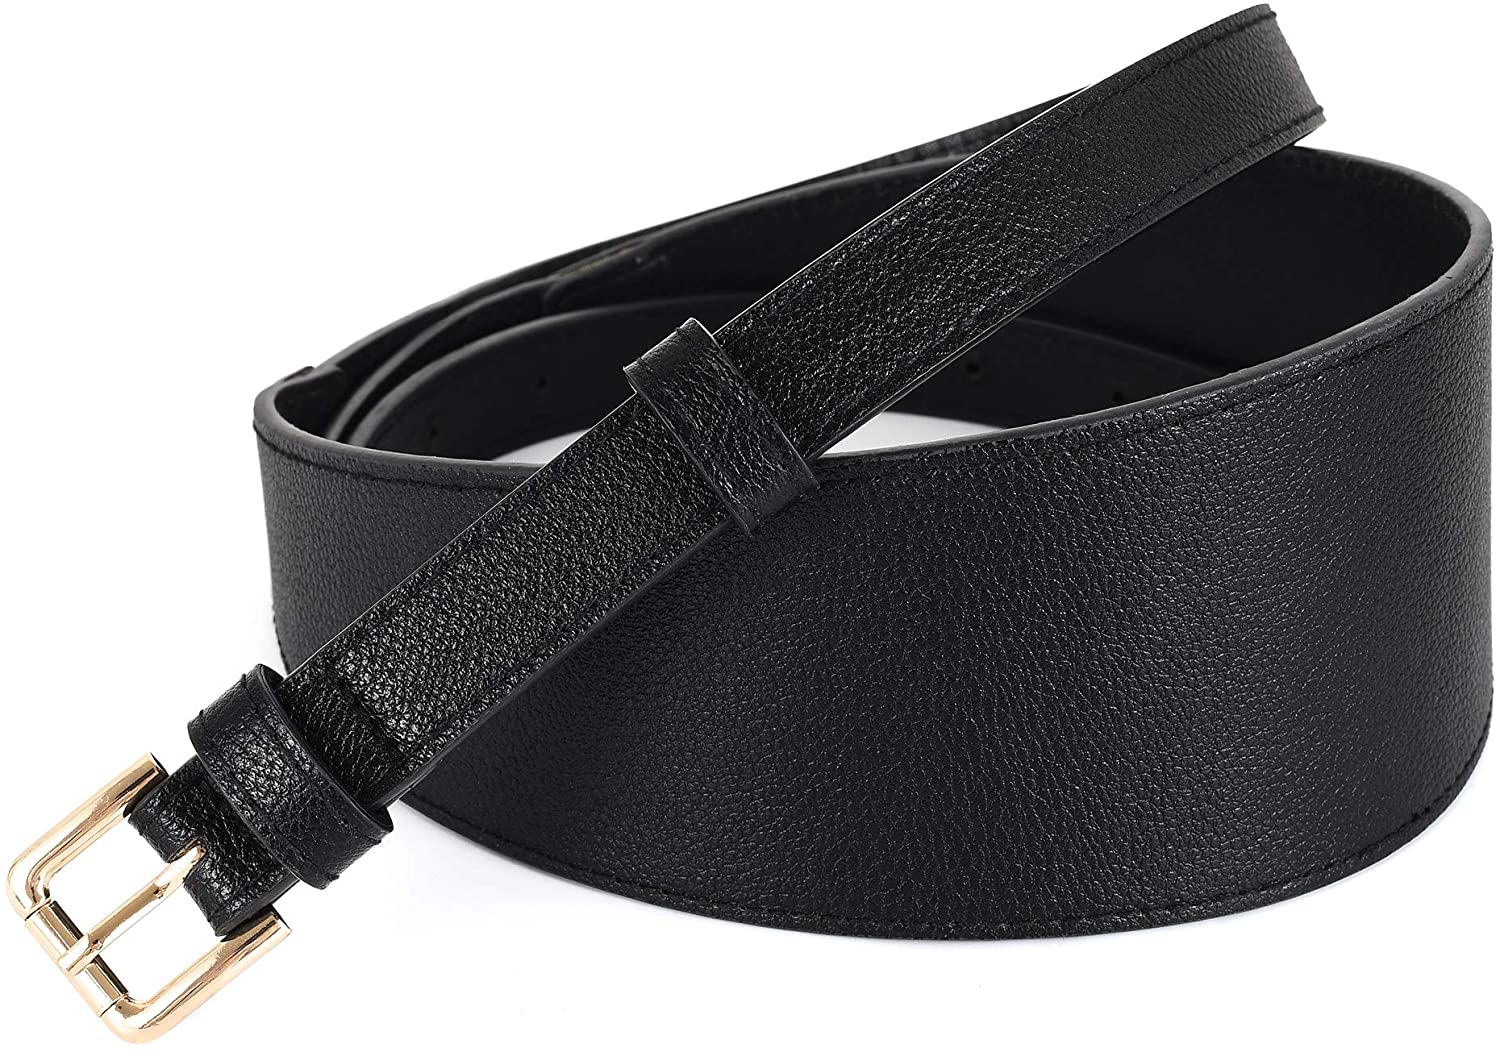 WHIPPY Women Leather Belt with Double Ring Buckle, Black Waist Belt for  Jeans Dress - Walmart.com